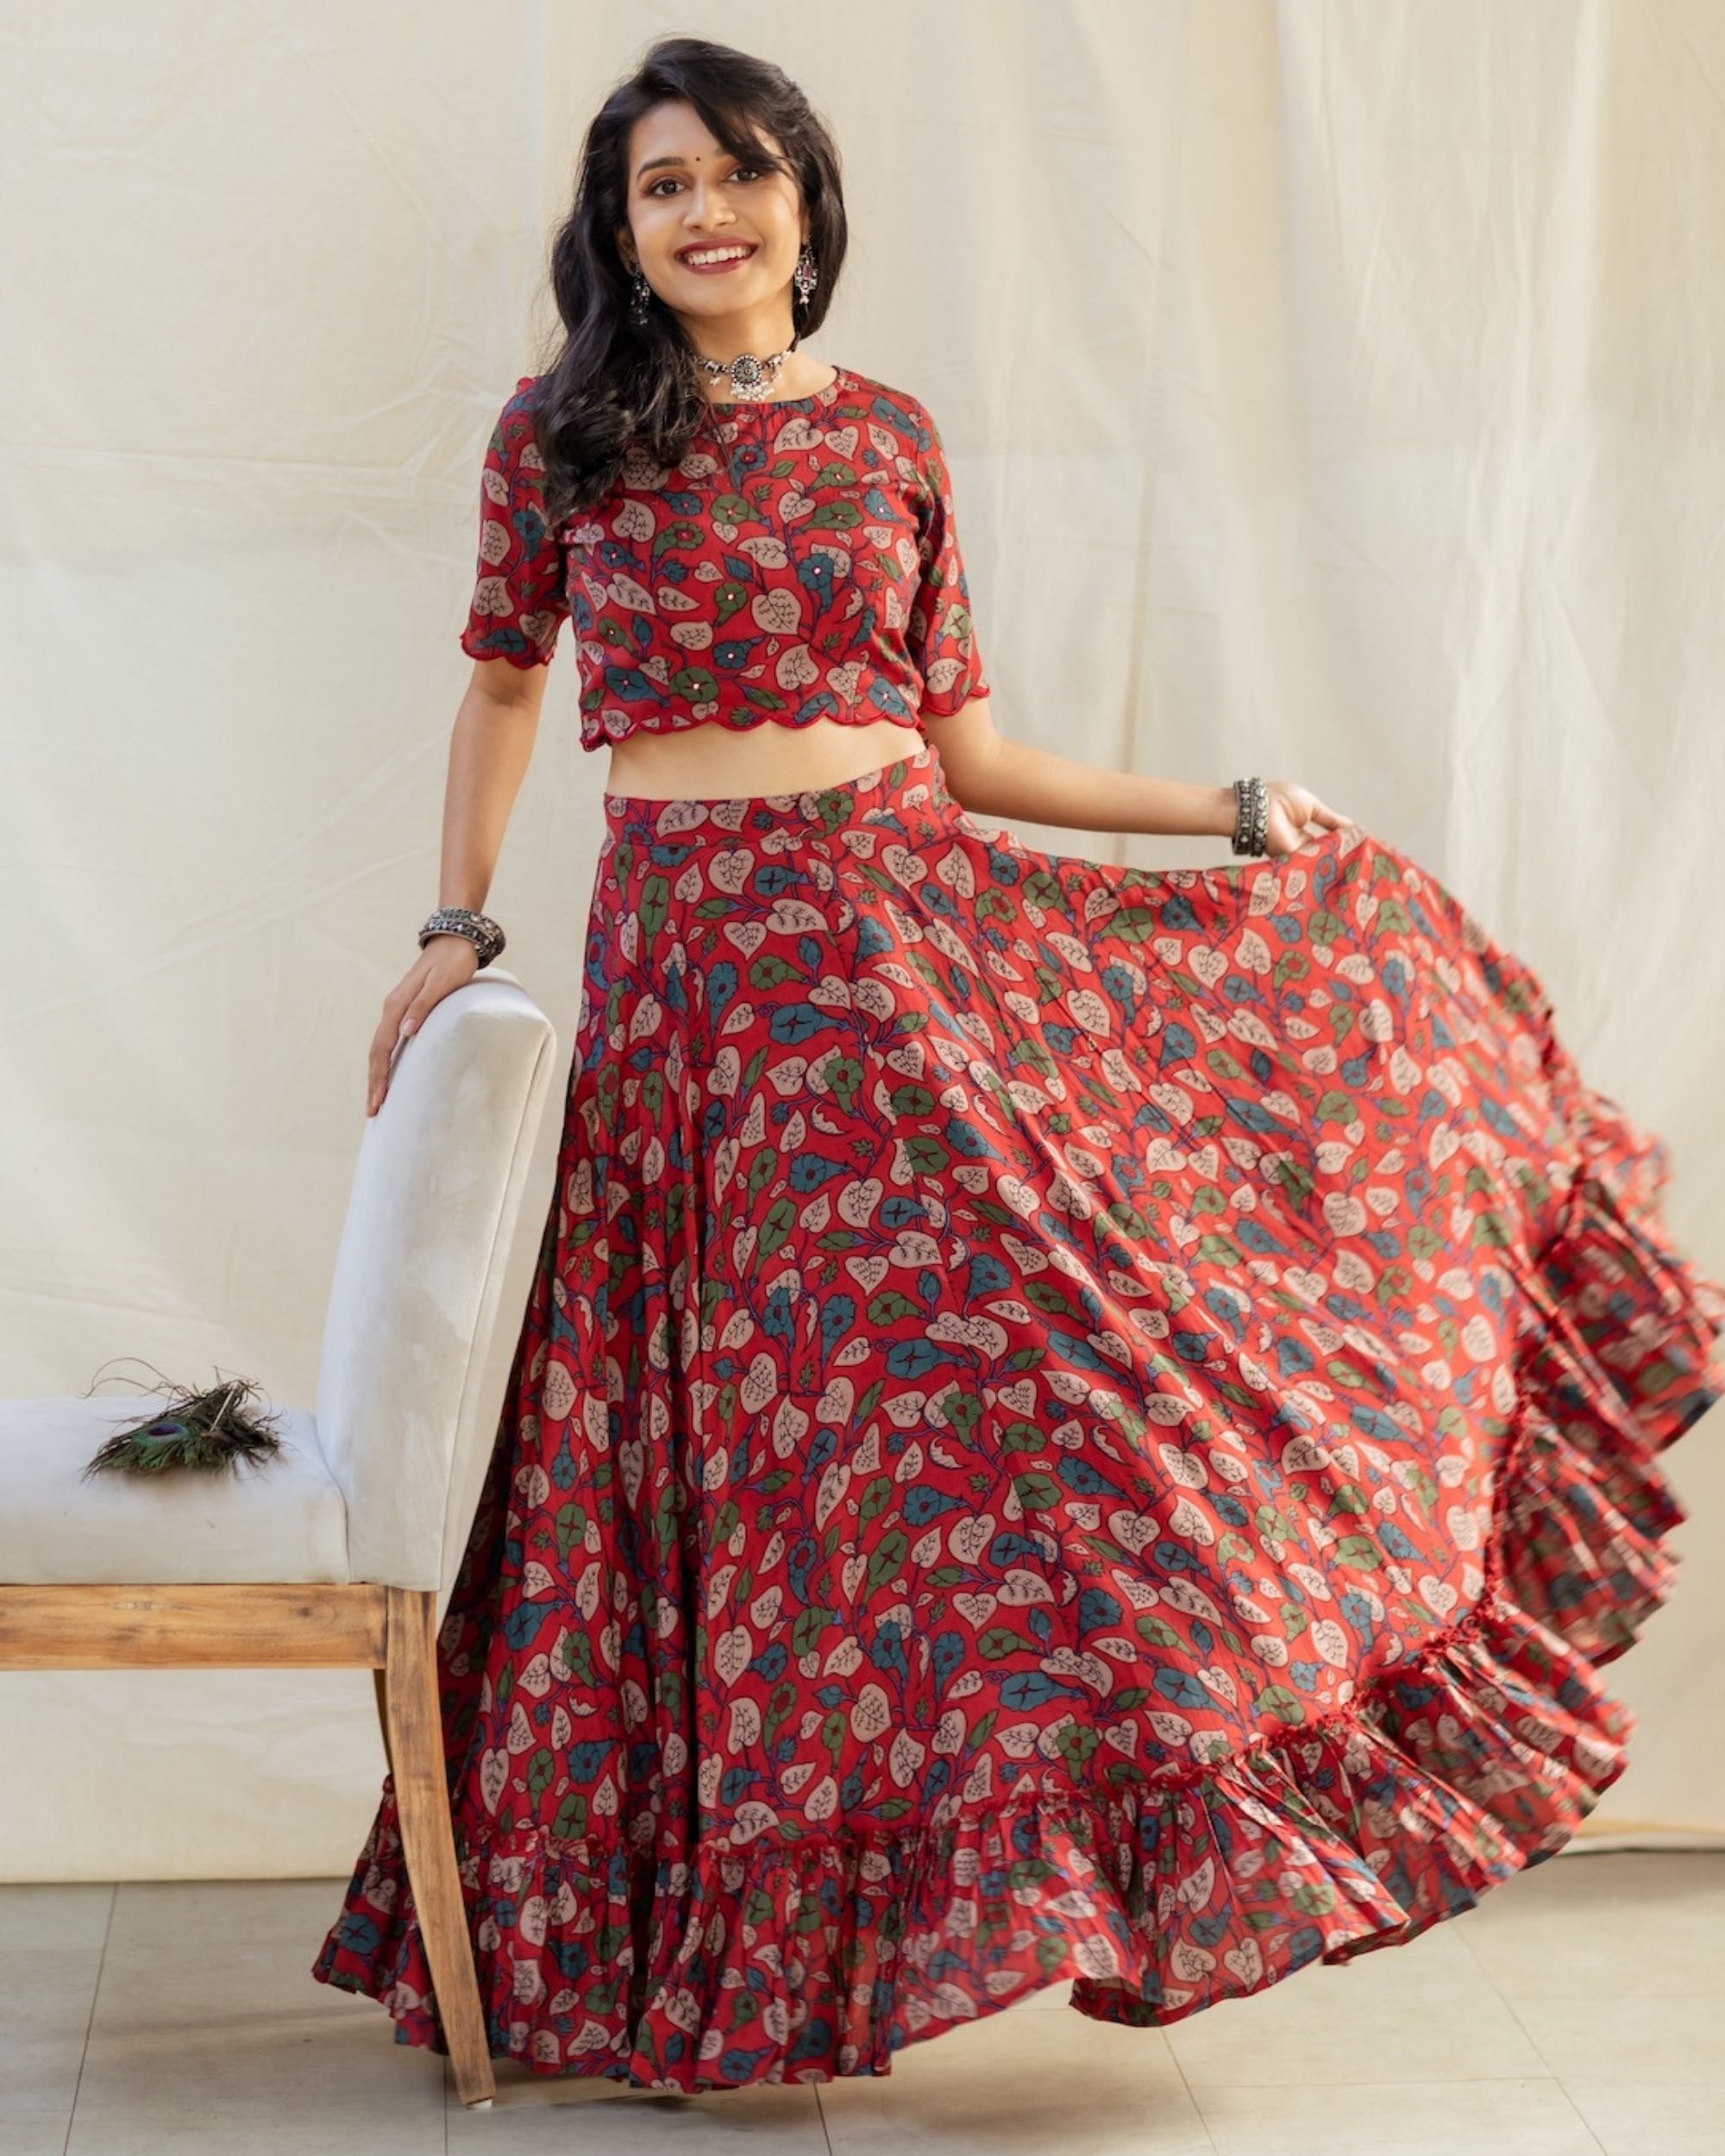 Red floral kalamkari top with ruffled skirt - set of two by Athira ...